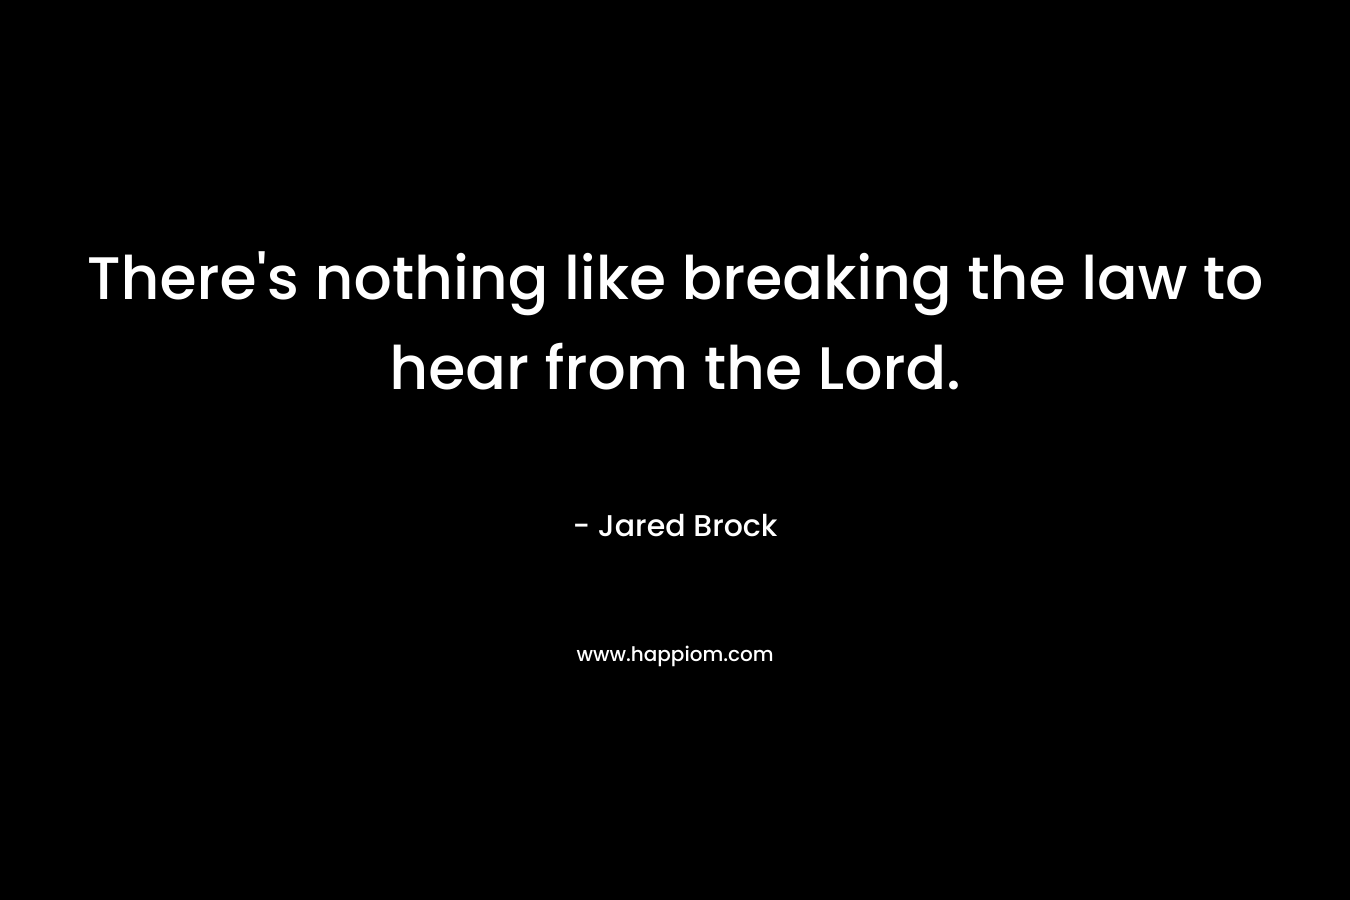 There’s nothing like breaking the law to hear from the Lord. – Jared Brock